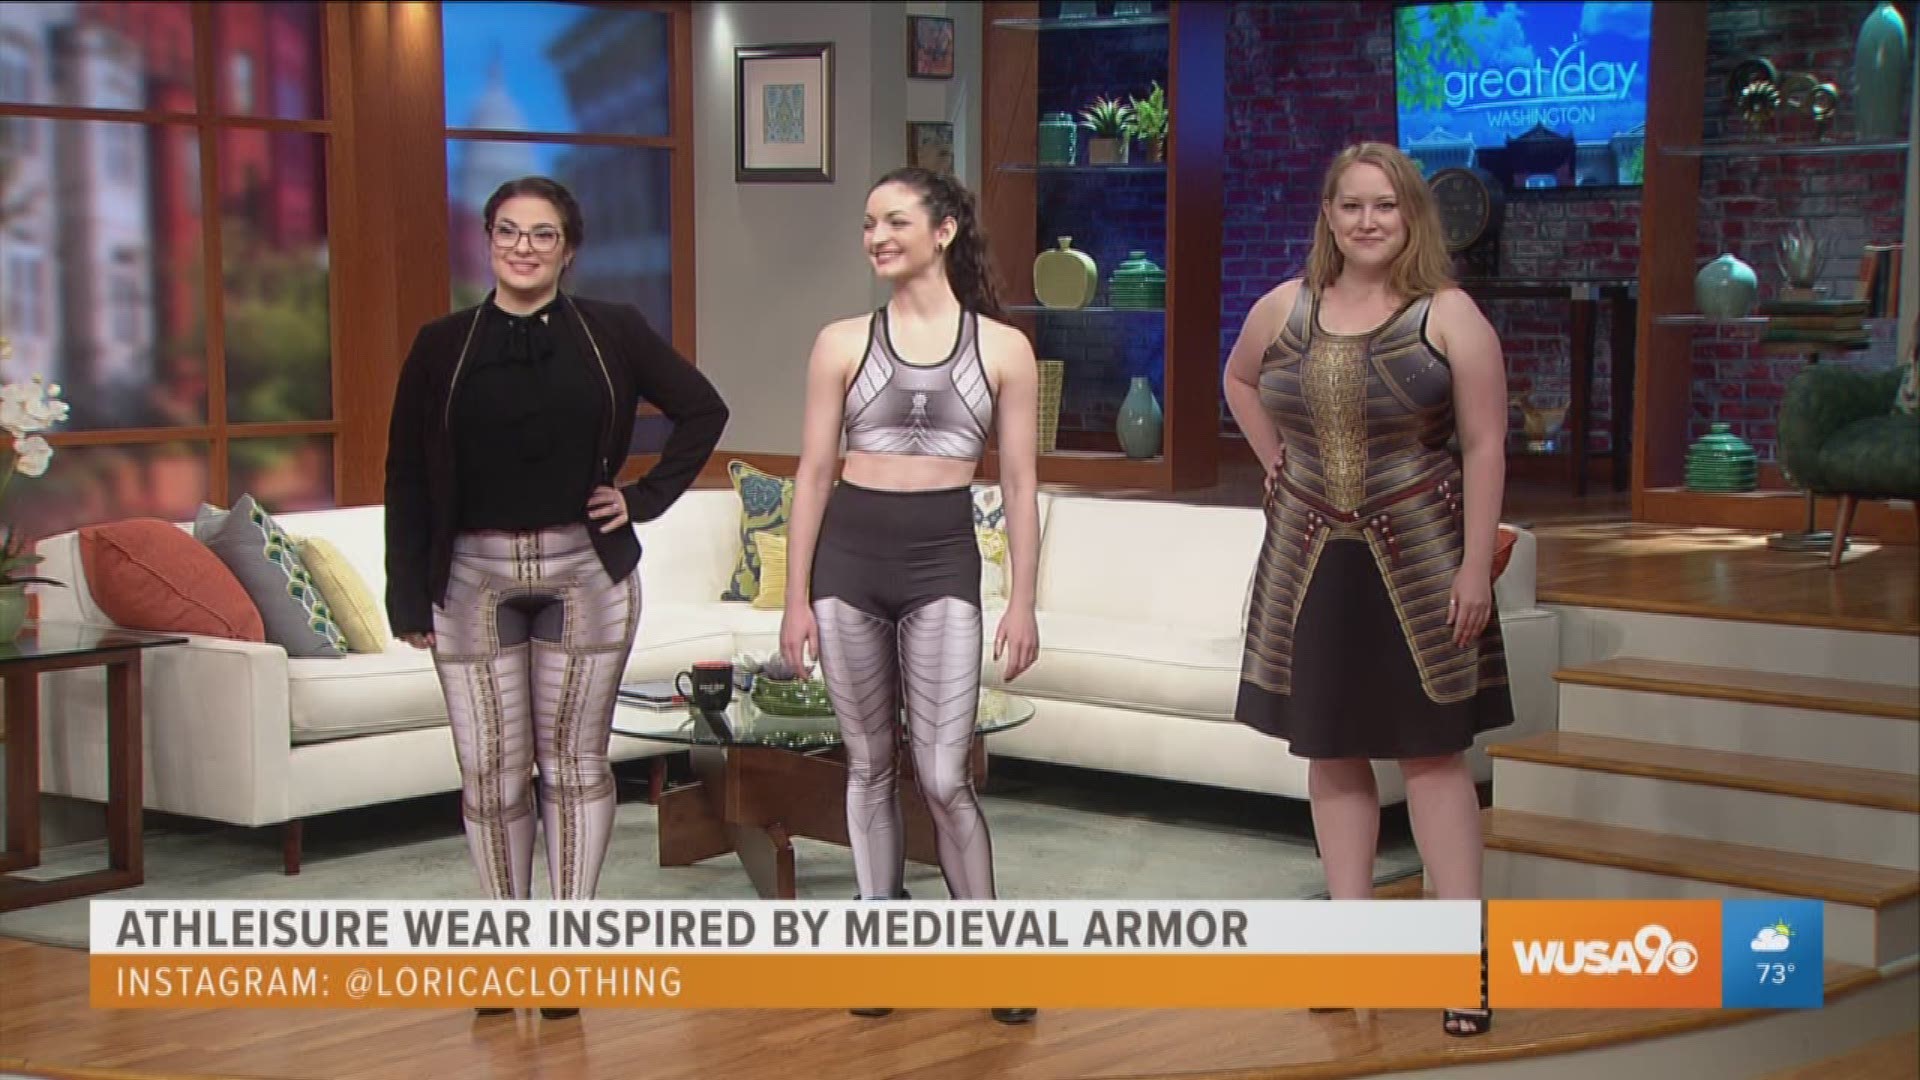 Finding athleisure wear that is unique to your own aesthetic can be quite the challenge. Especially if you are into warrior wear that includes heavy armor. However, Elie Hutchinson, founder and designer of Lorica Clothing has created a new genre of athleisure wear that is perfect for the warrior prince or princess. To purchase a piece from her collection, visit loricaclothing.com